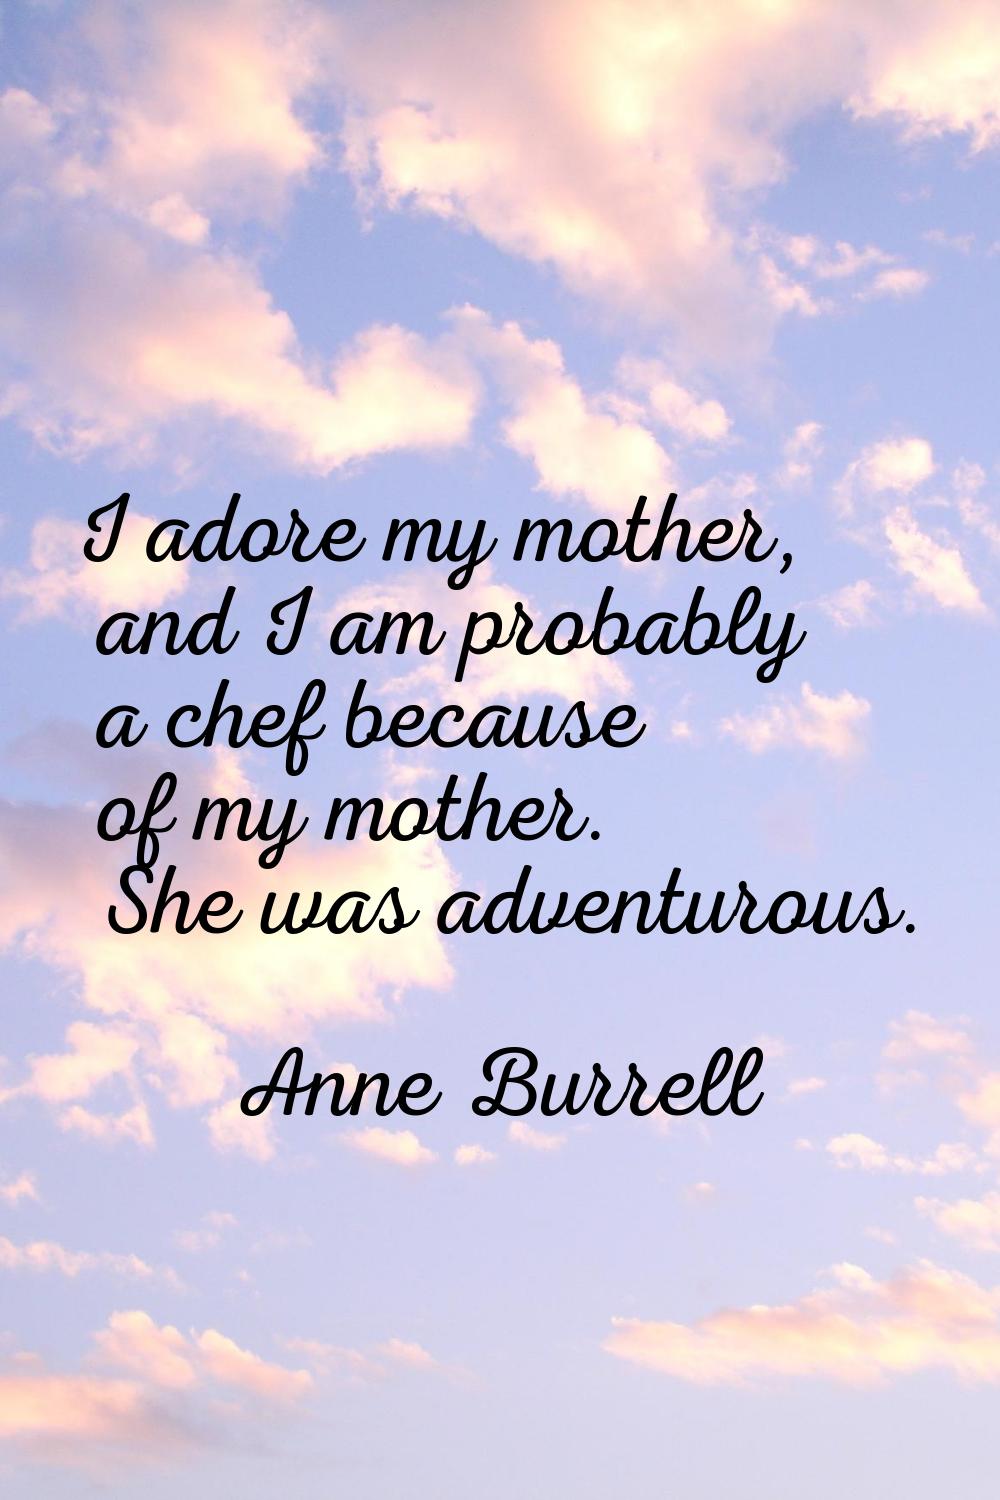 I adore my mother, and I am probably a chef because of my mother. She was adventurous.